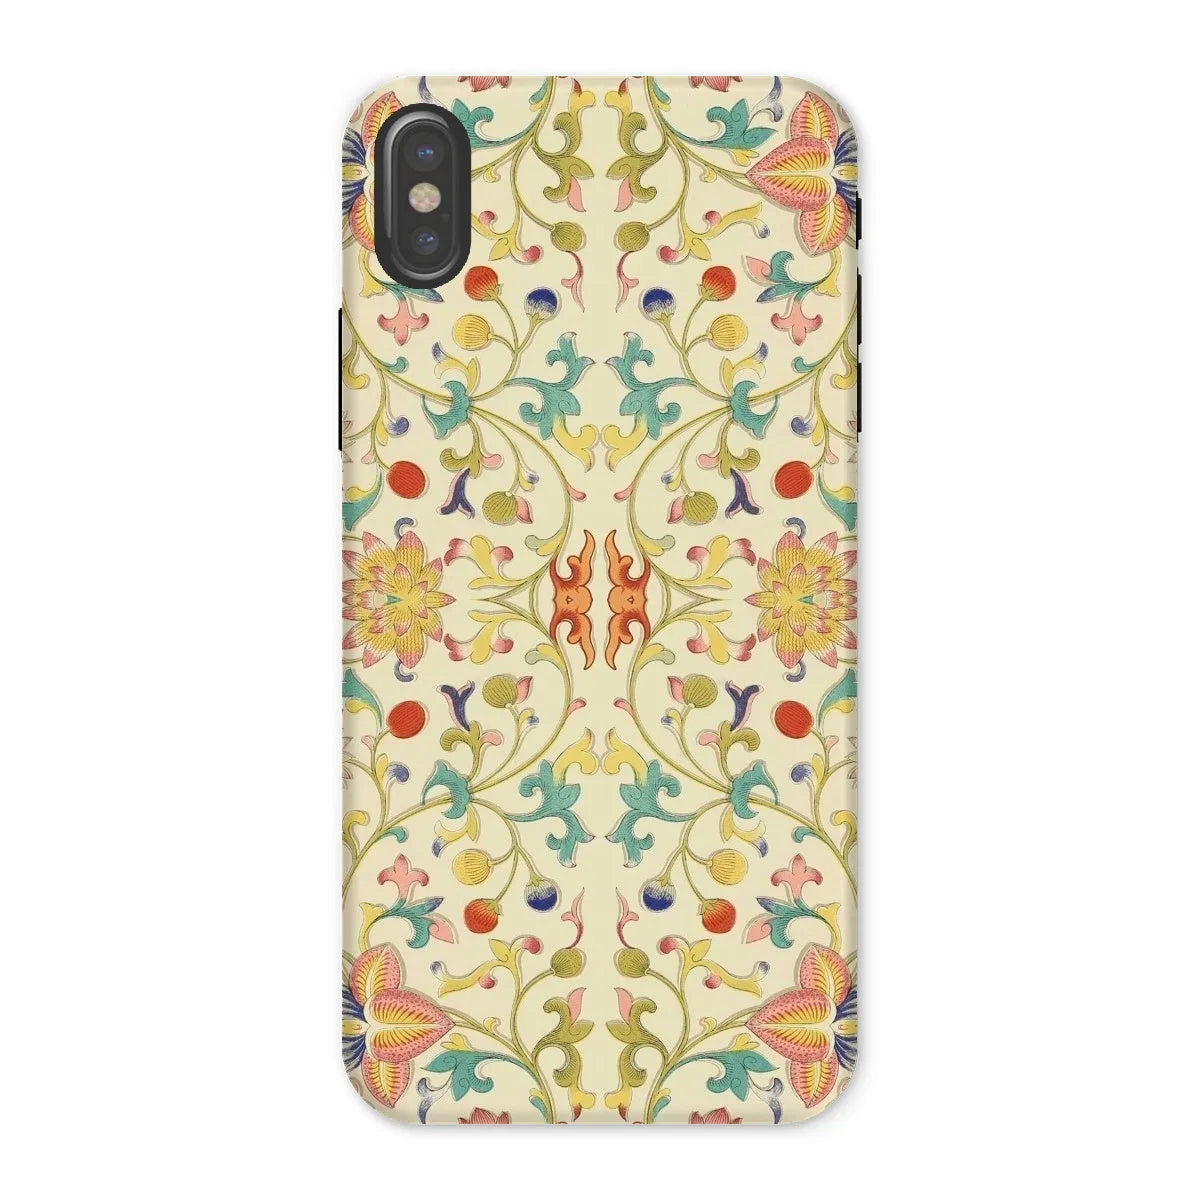 Over The Rainbow - Chinoiserie Pattern Art Phone Case - Iphone x / Matte - Mobile Phone Cases - Aesthetic Art